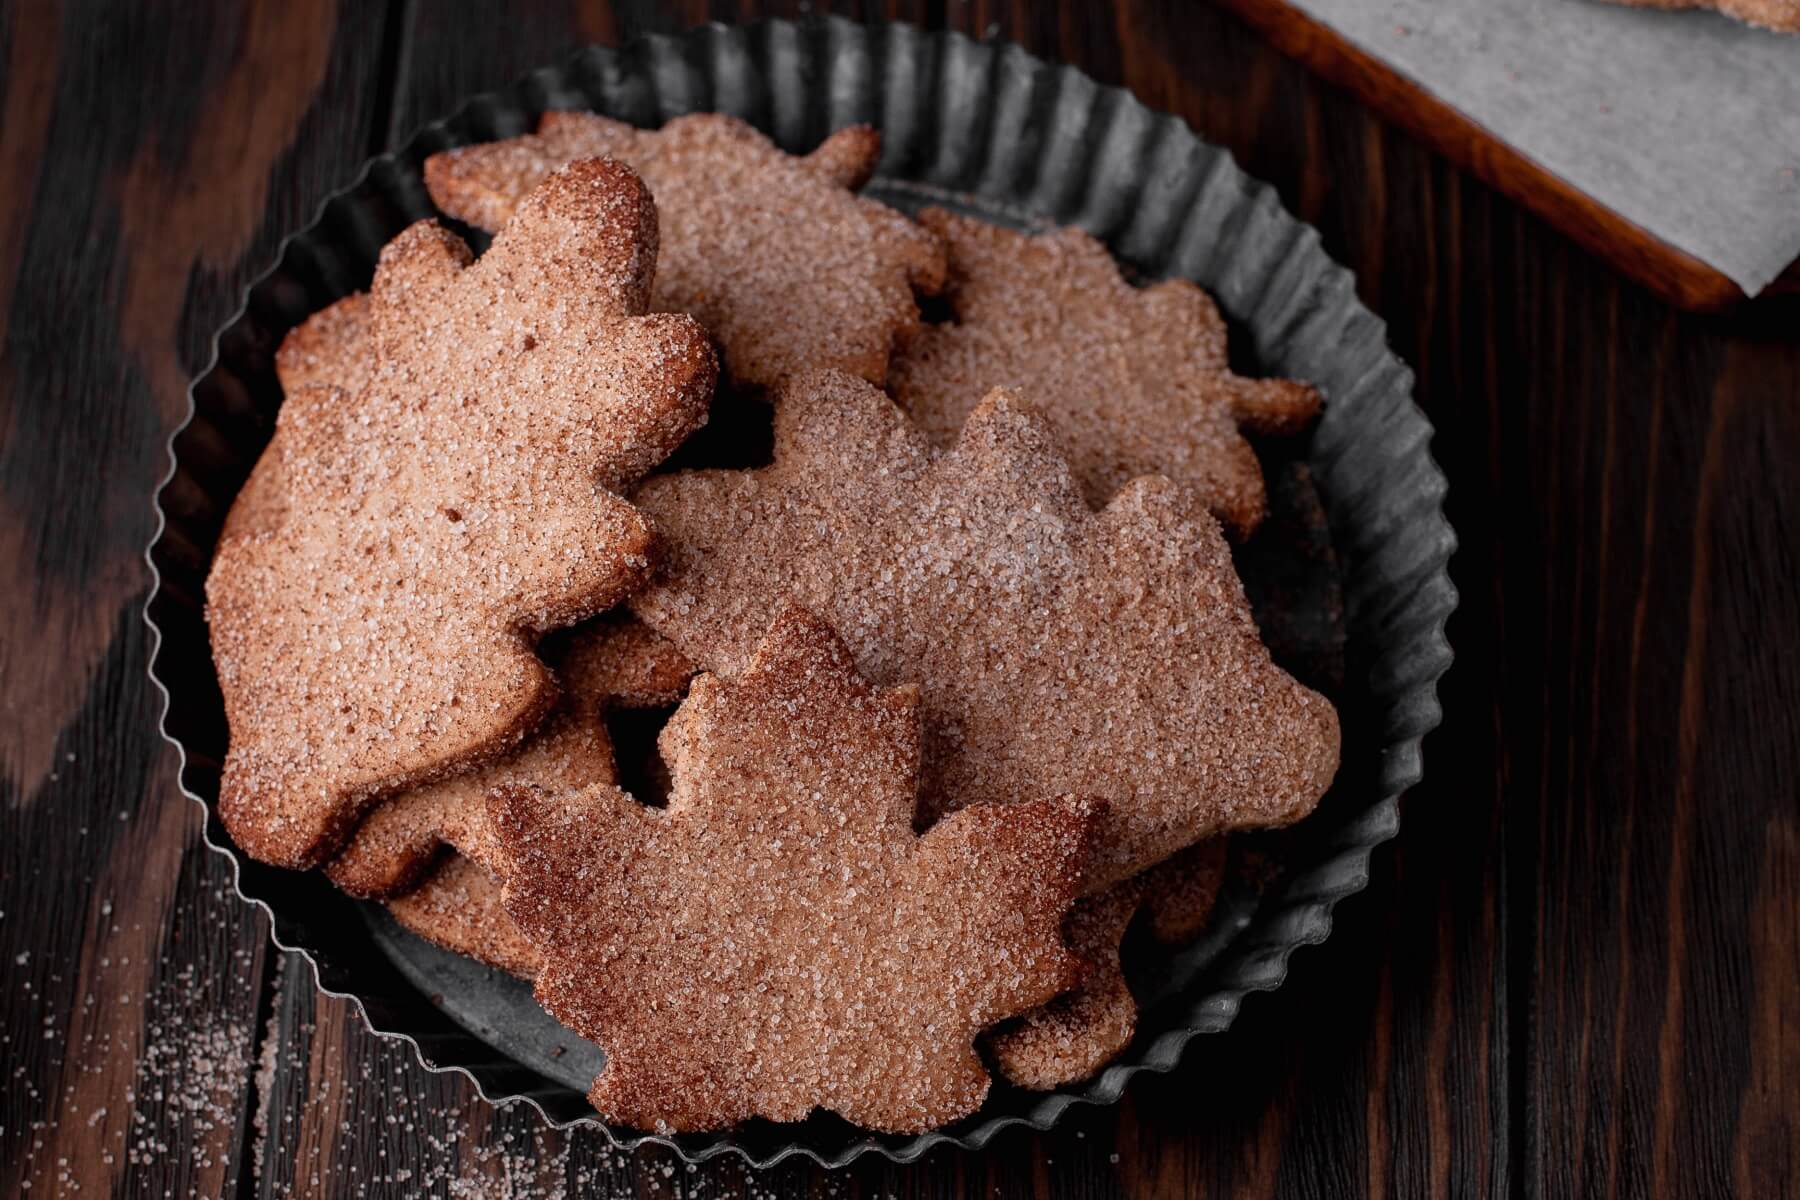 A tin plate filled with leaf shaped Walnut Cookies coated in cinnamon sugar.